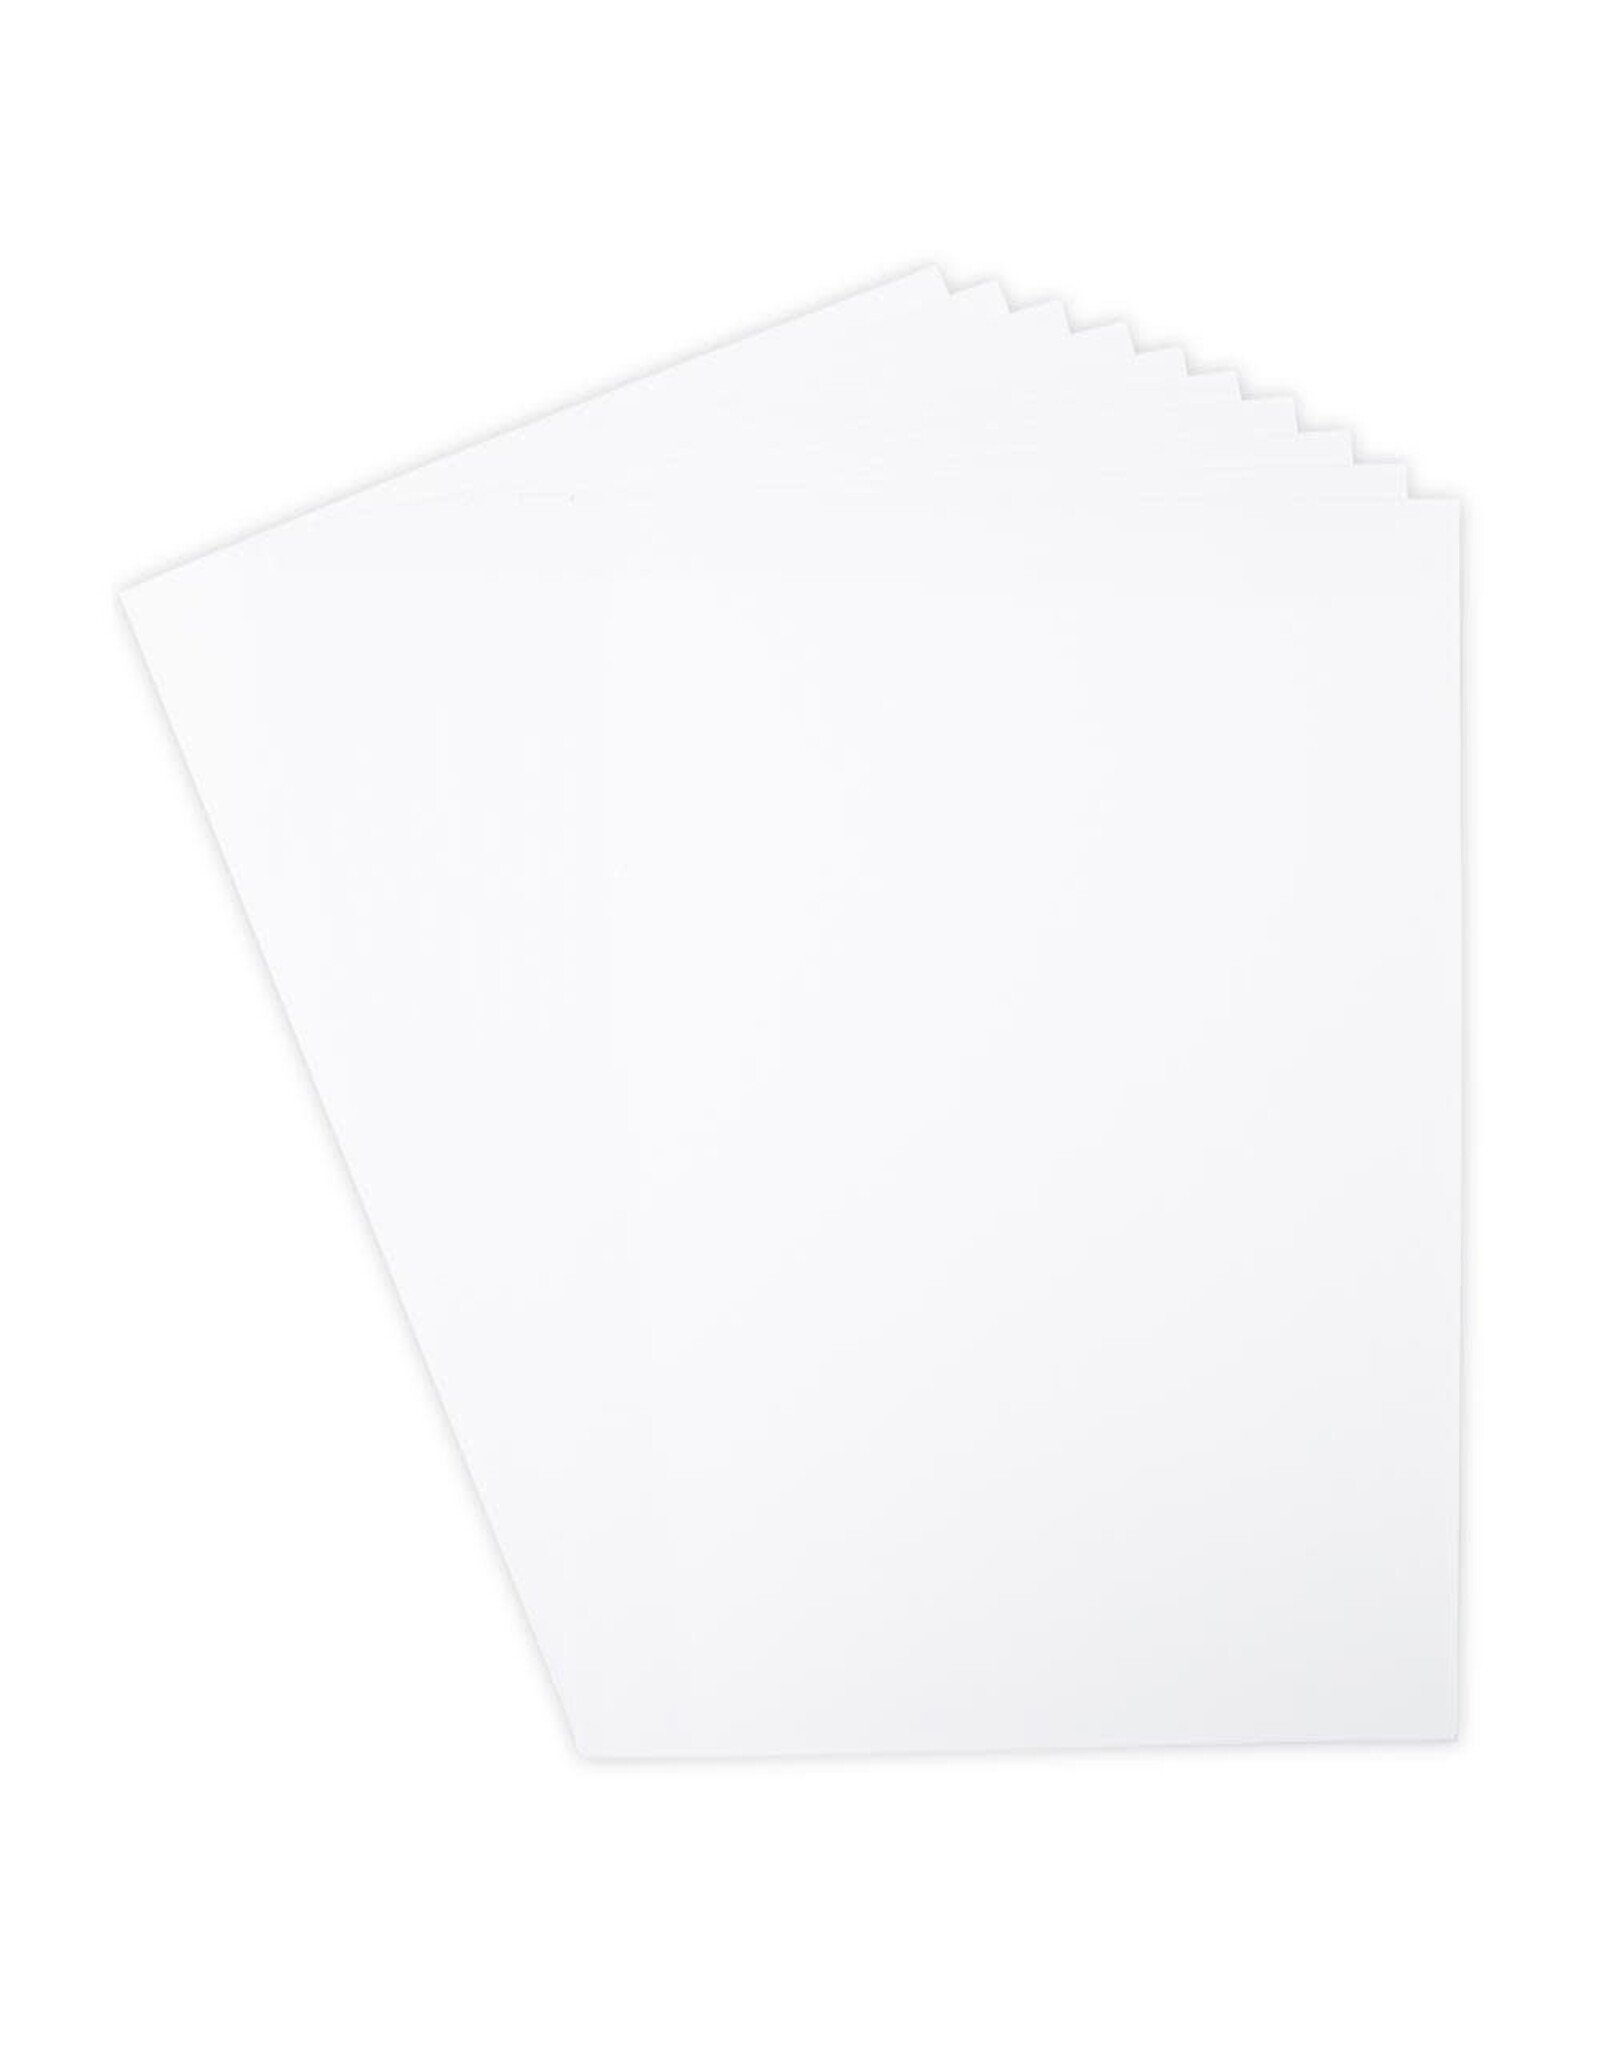 SIZZIX SIZZIX SURFACEZ WHITE SMOOTH CARDSTOCK 60 SHEETS